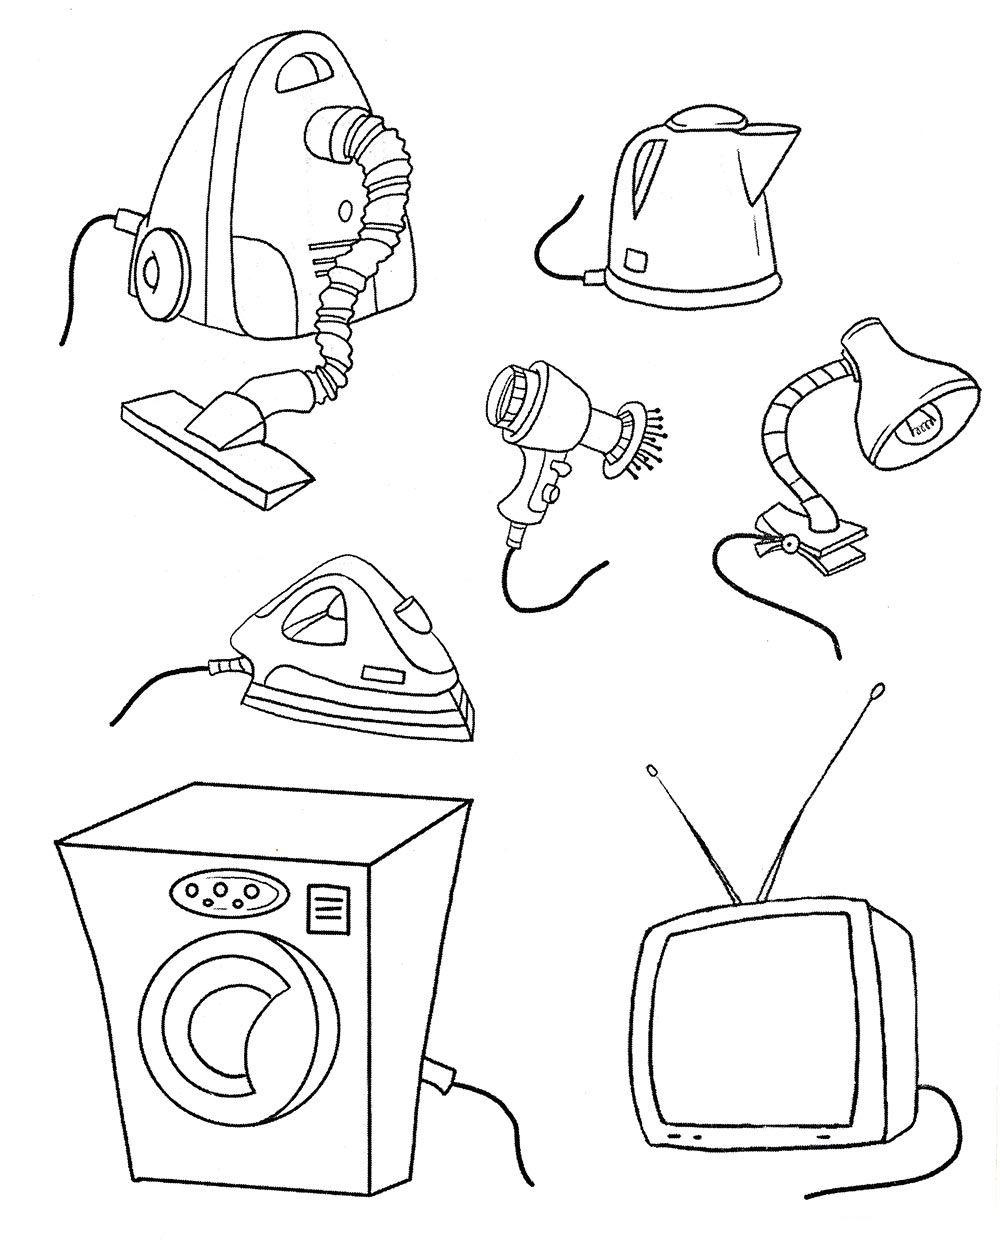 Electricity Coloring Page Coloring Pages